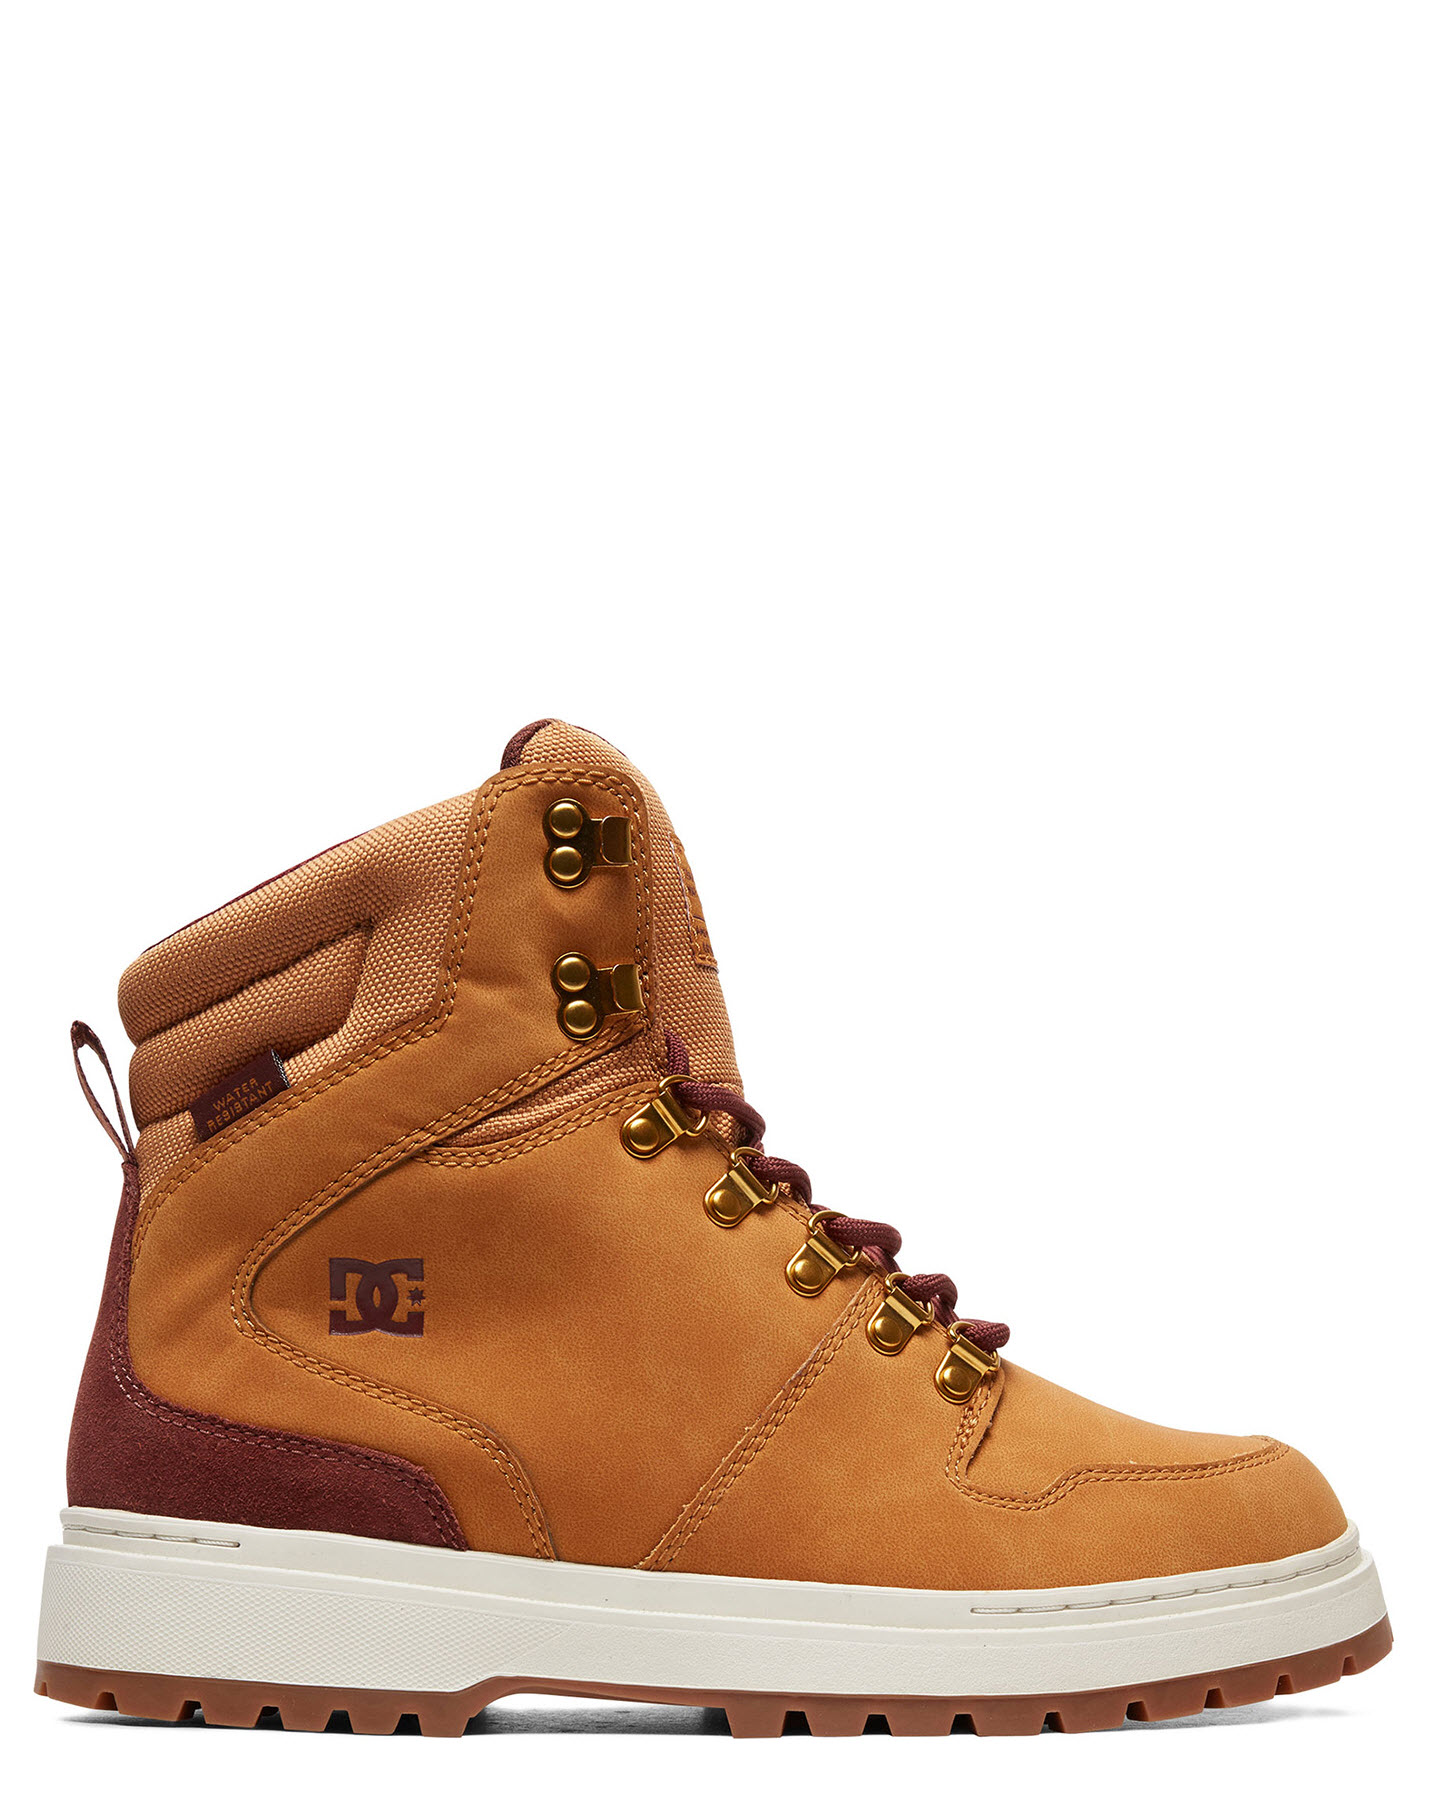 Dc Shoes Mens Peary Winter Boots 